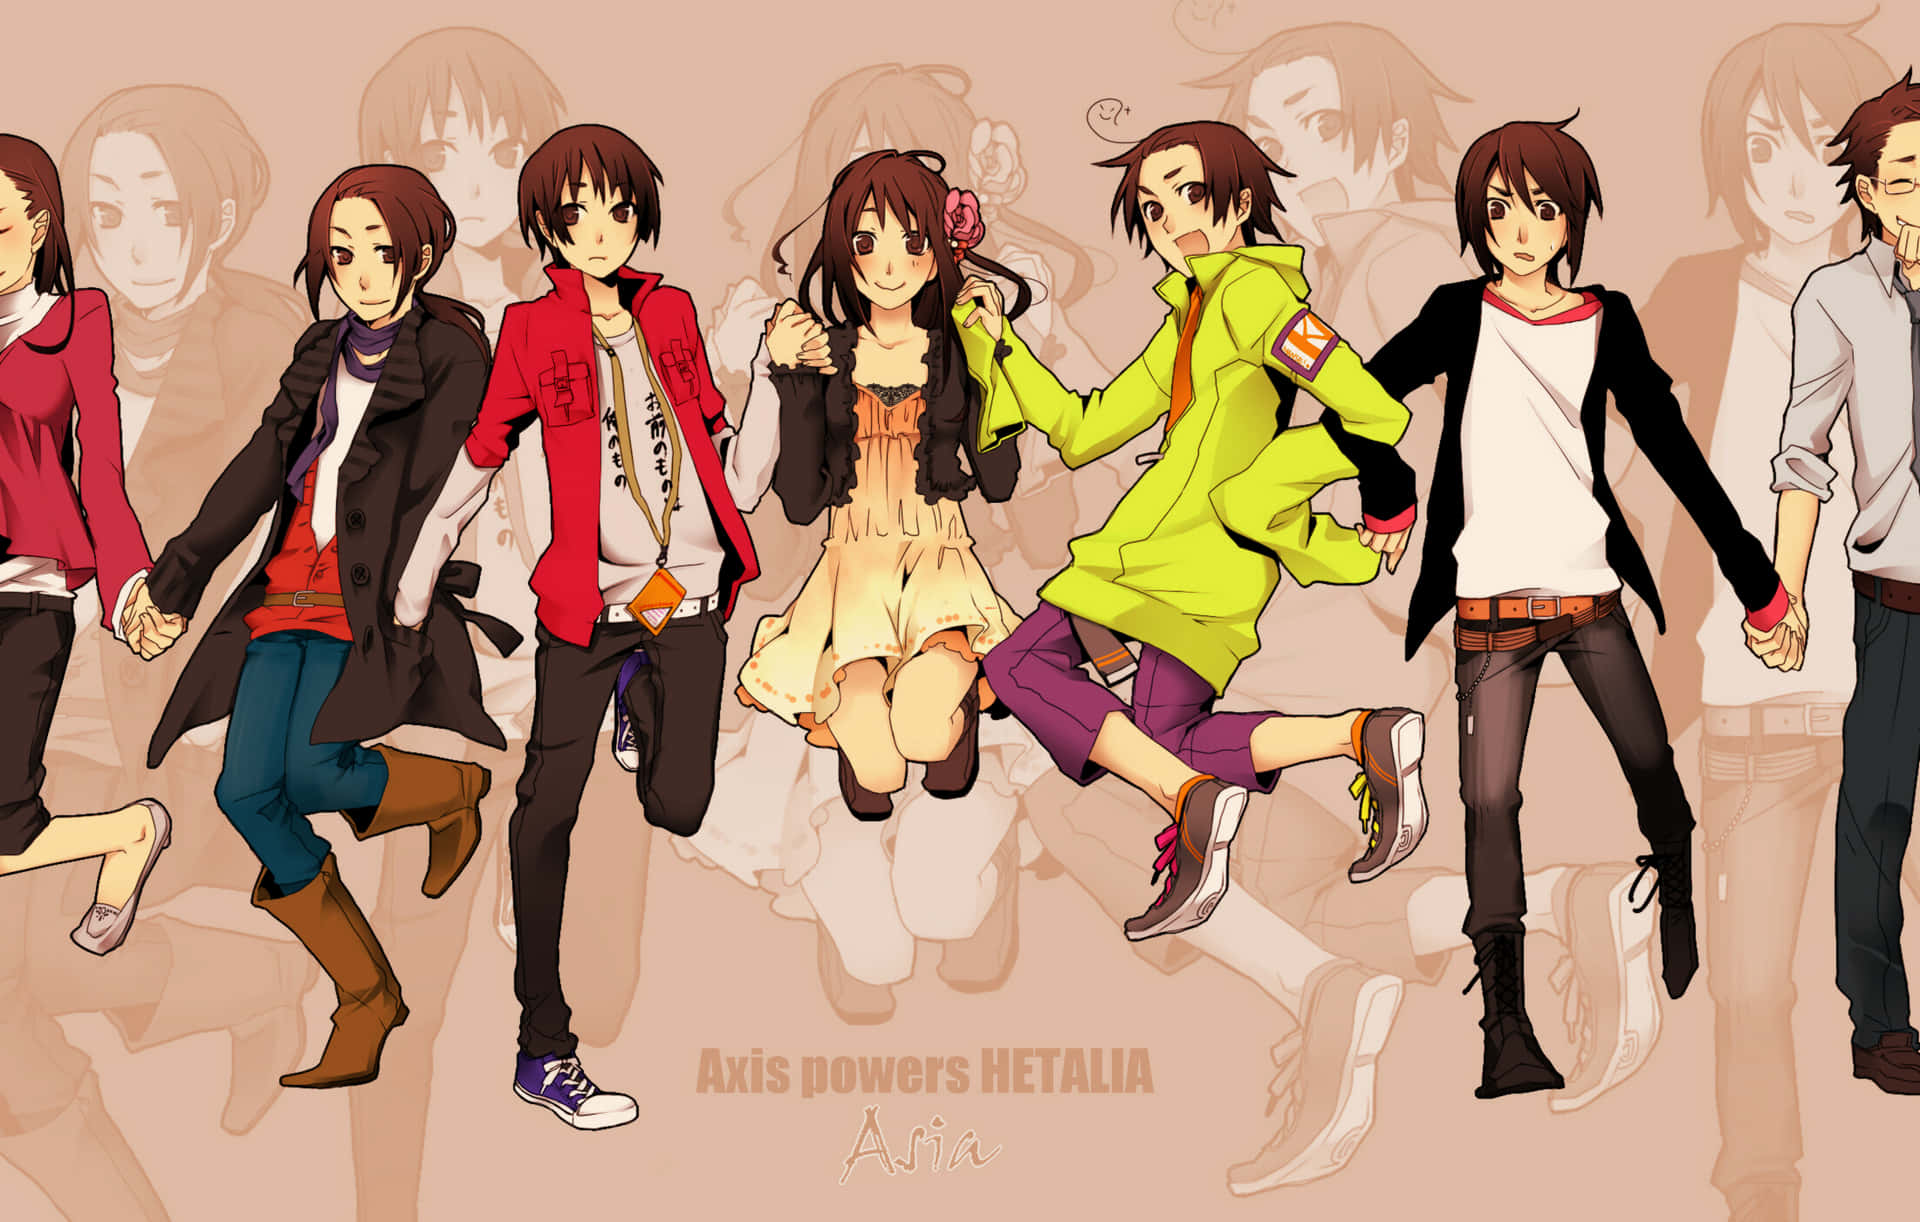 Let's have some fun and explore the wonderful world of Hetalia! Wallpaper